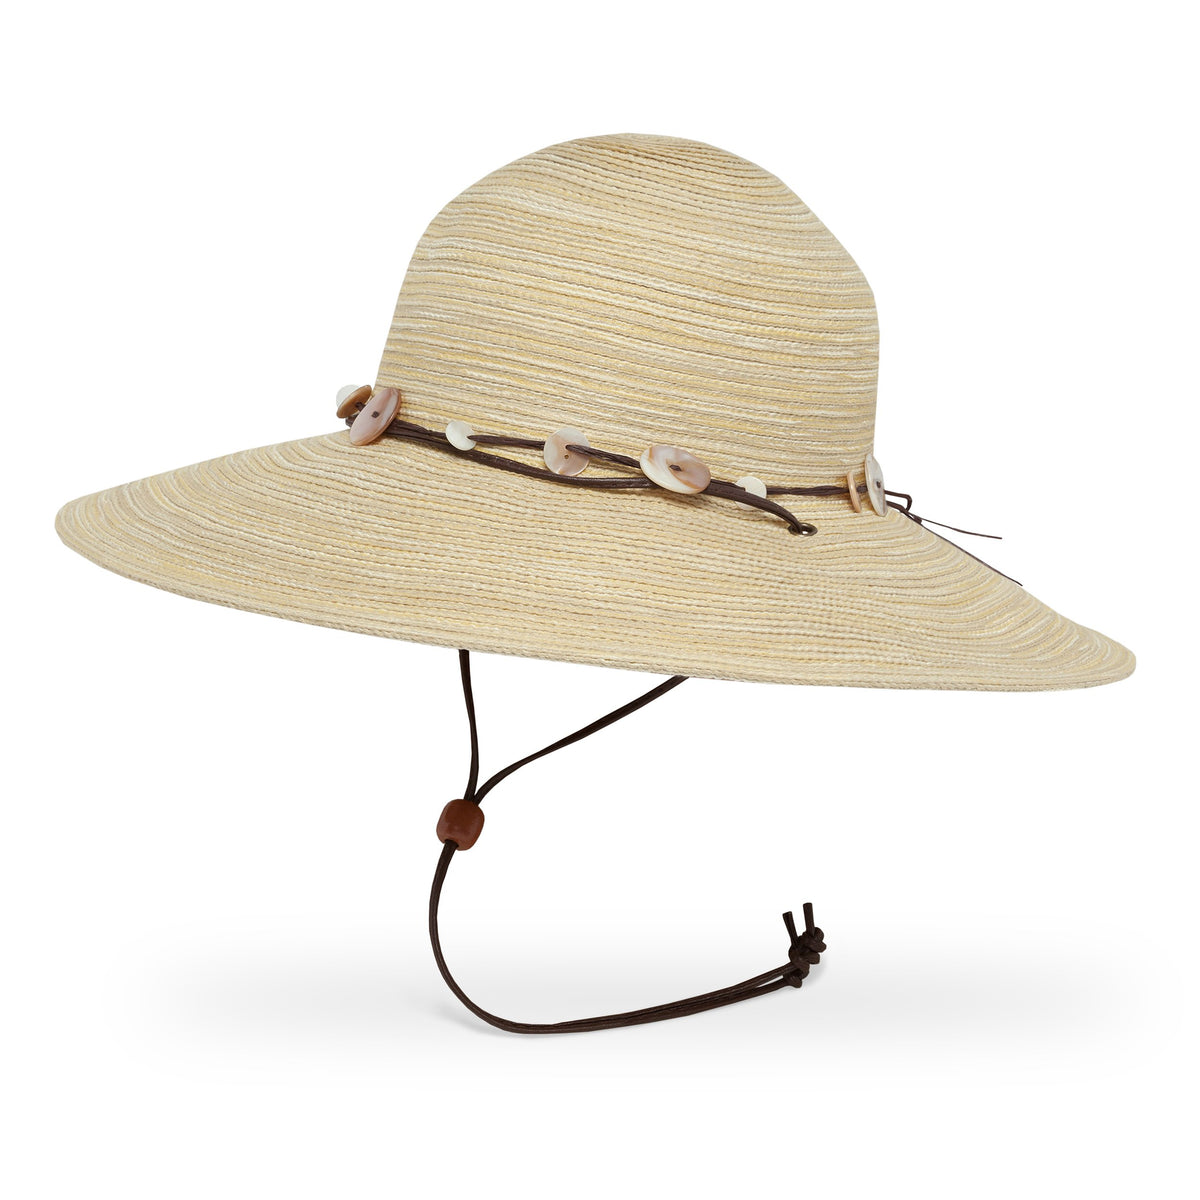 Sun hat Rope Let's Cruise Cowgirl Hats Women Garden hat Gifts for